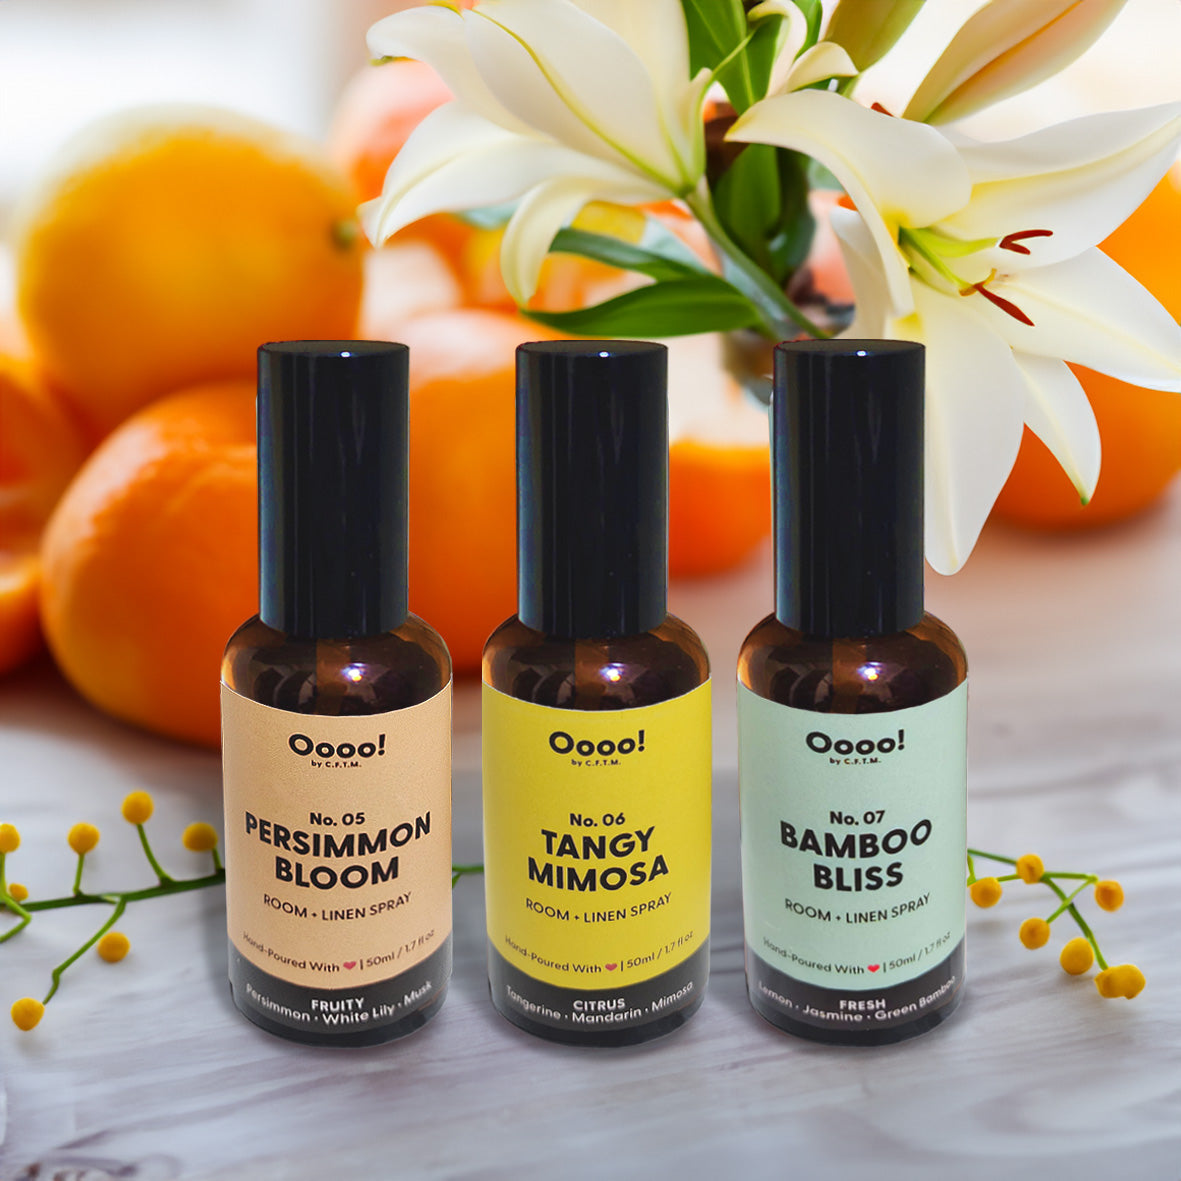 Aromatic Room+Linen Spray; Aromatic Room+Linen Sprays; Self-Care; Self-Love; Self-Pampering; Handpoured Room+Linen Spray; Phthalate-Free; Paraben-Free; Room Spray Scent; Room Spray Fragrance; Home Fragrance; Home Fragrances; Bamboo Bliss; Fresh